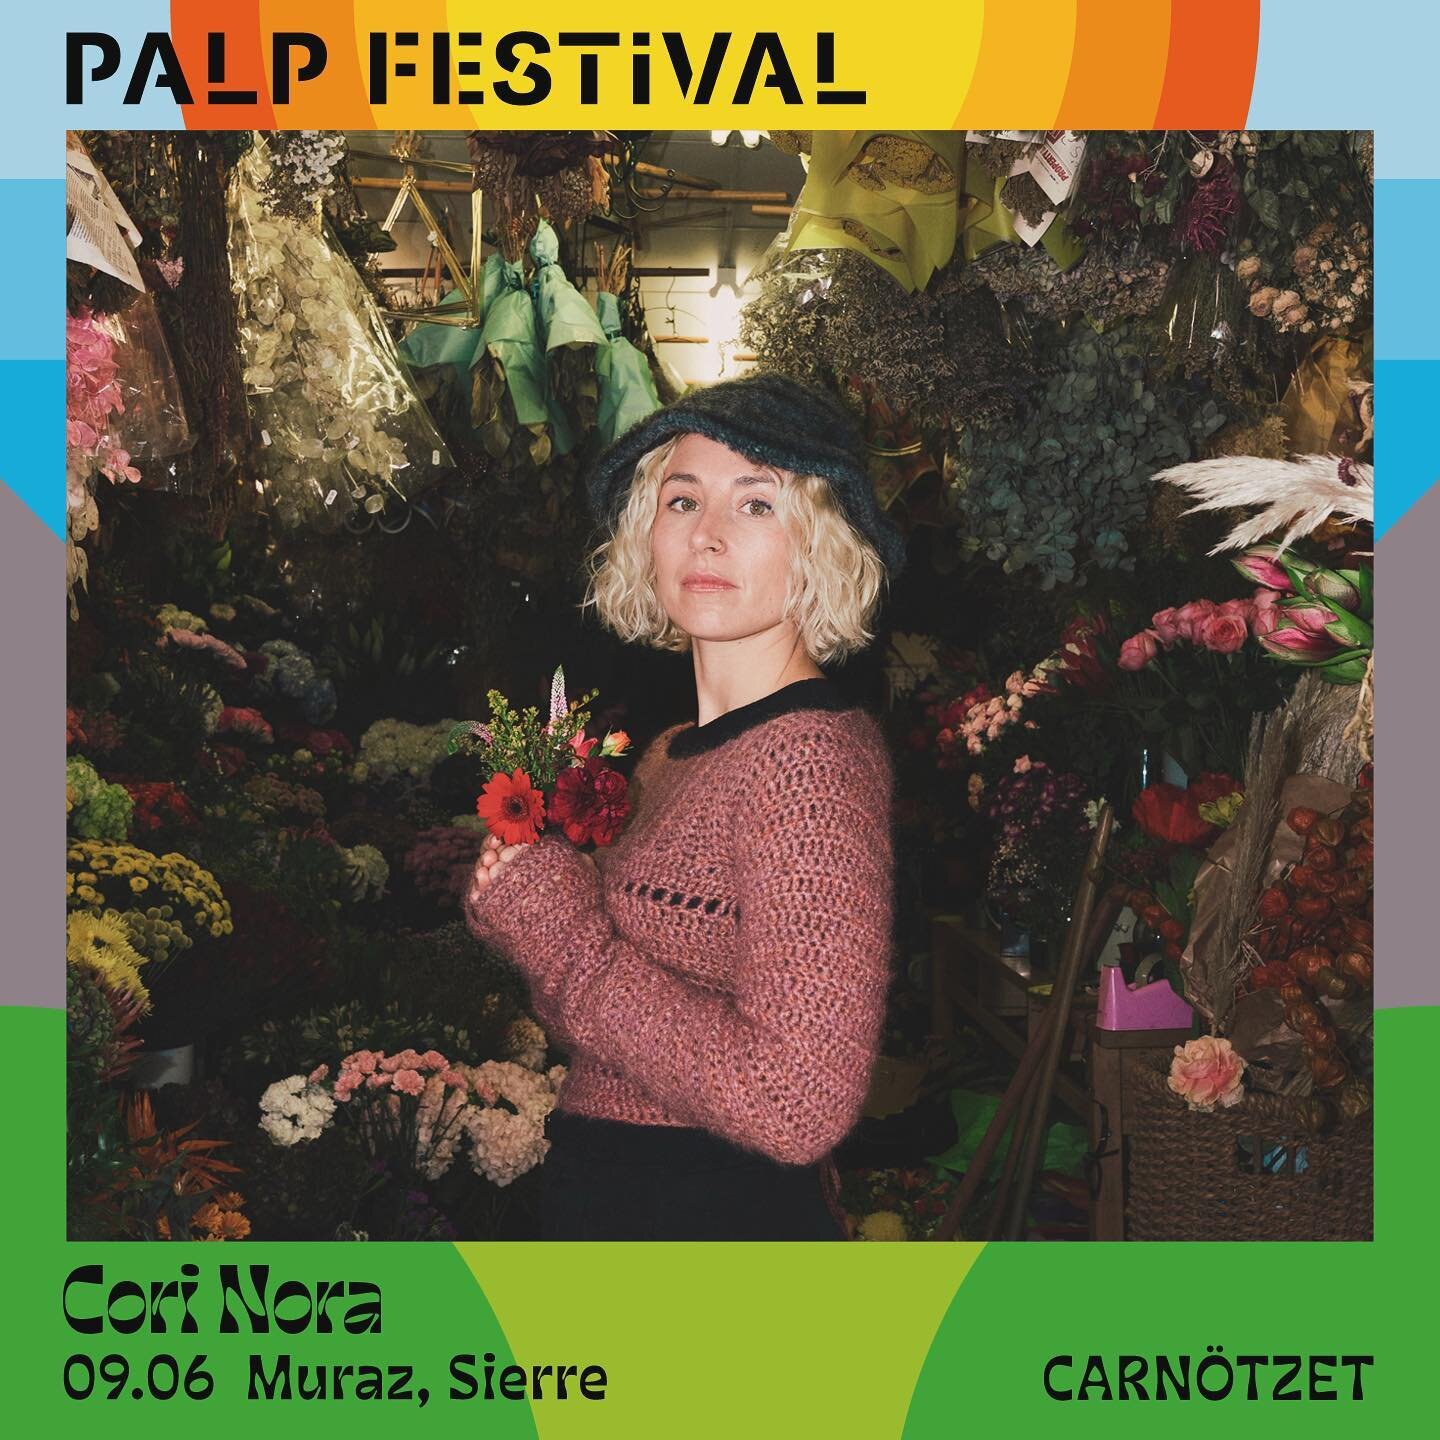 we'll play our songs for the mountains🗻🌿 @palp_festival junio 9 !

come by train if you can, mountains &amp; humans would be grateful. 

ticket link in bio.

@haubisongs 🥁
@irasciblemusic